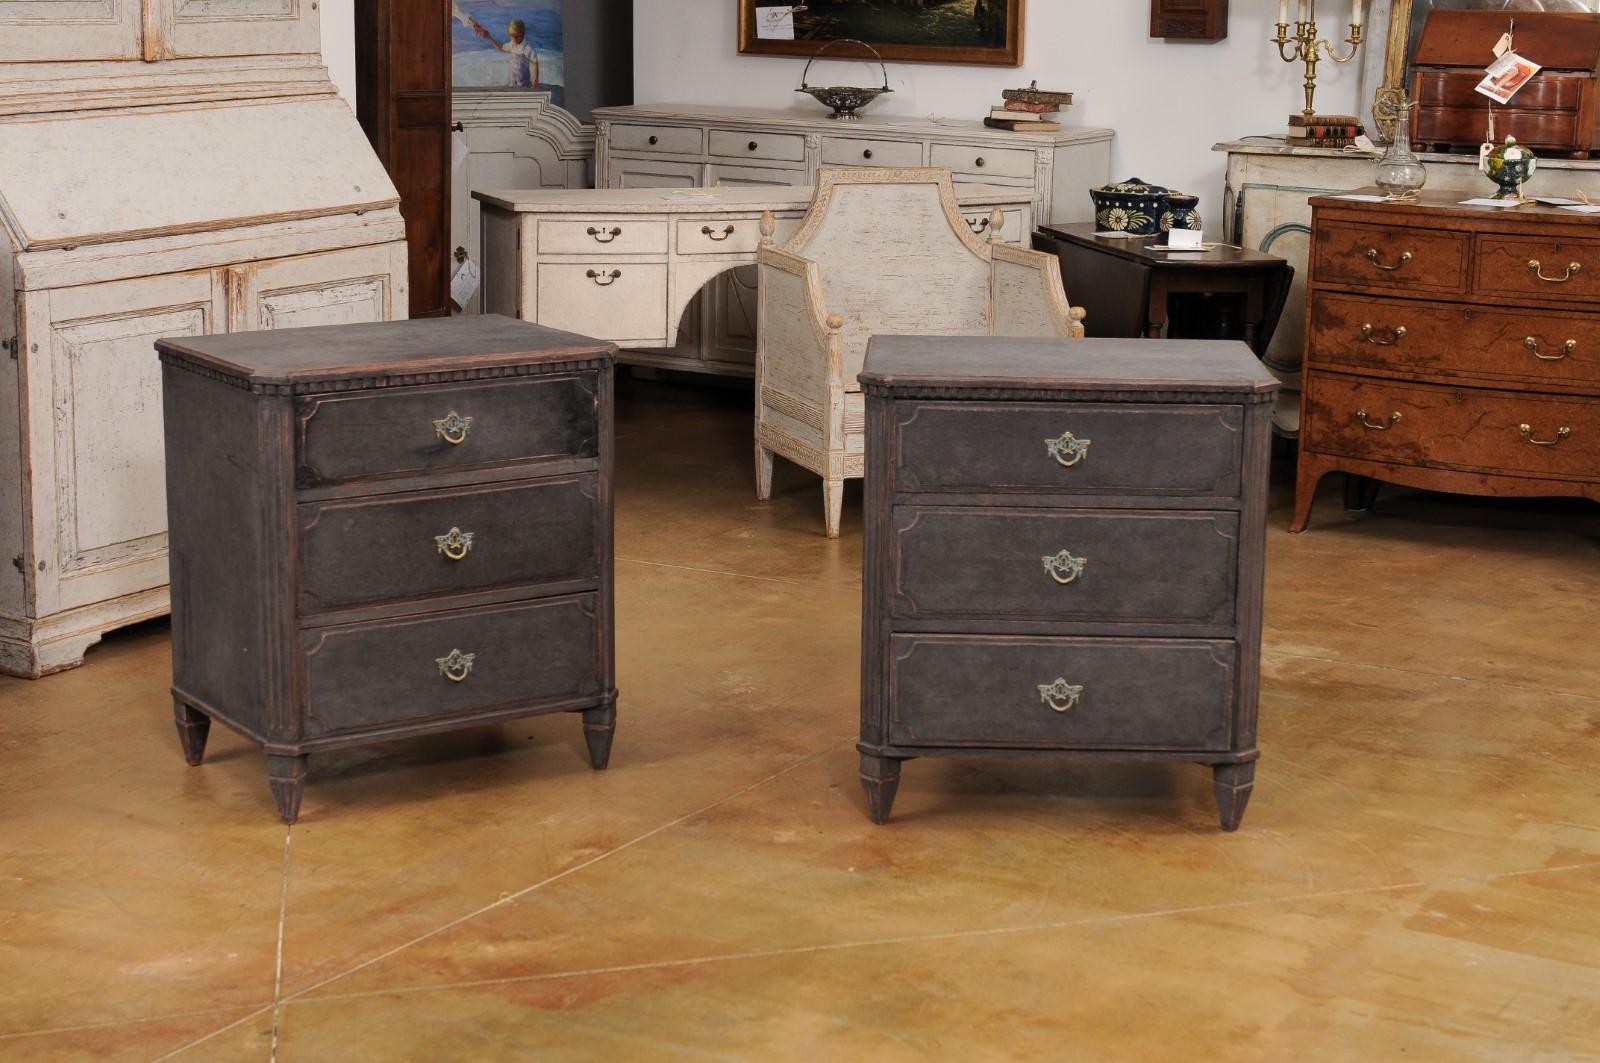 Carved Gustavian Style 19th Century Swedish Charcoal Painted Three-Drawer Chests